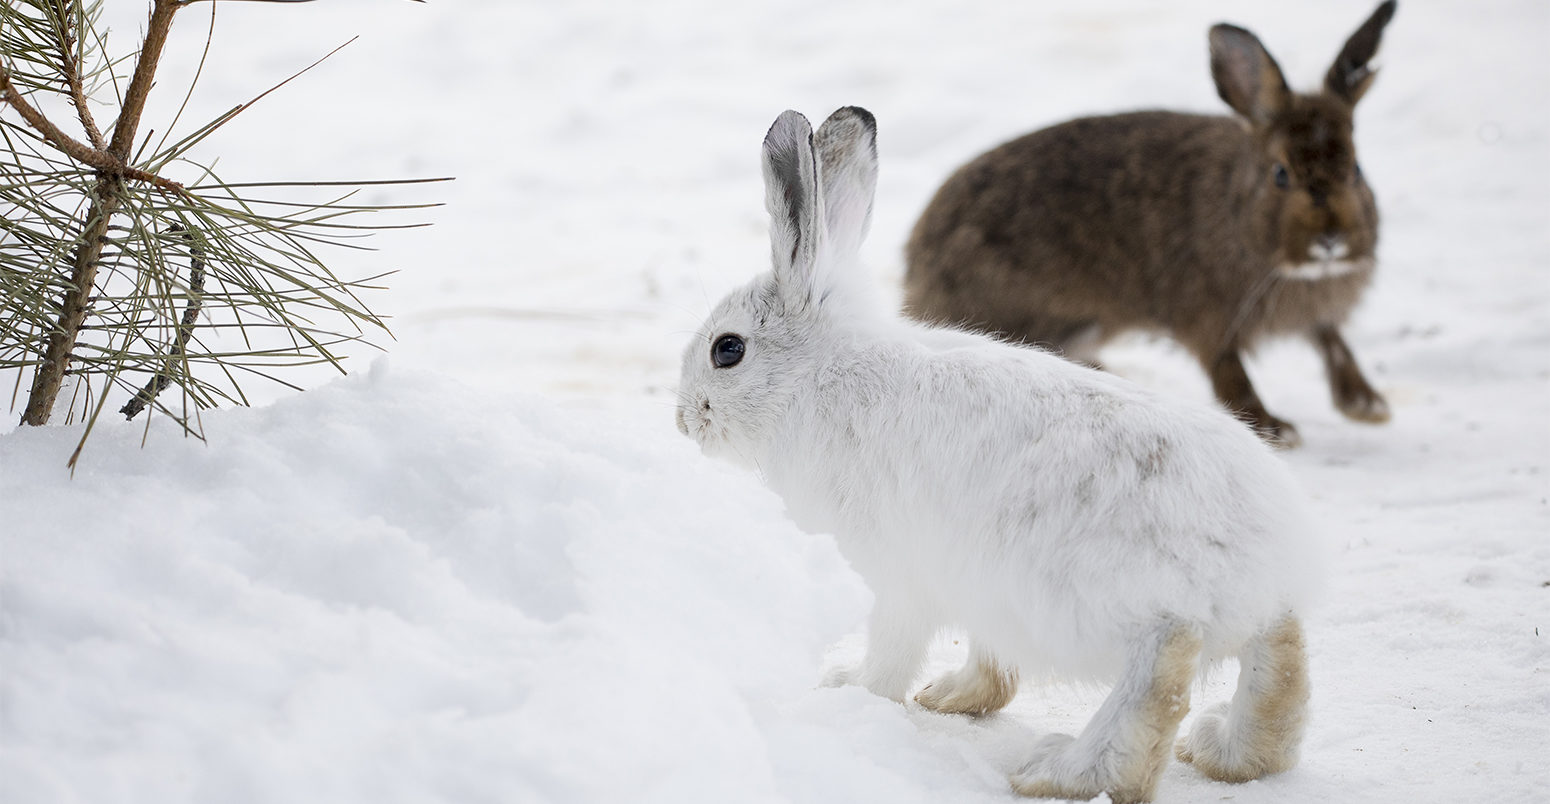 https://www.carbonbrief.org/wp-content/uploads/2018/02/Arctic-hares-1550x804.jpg